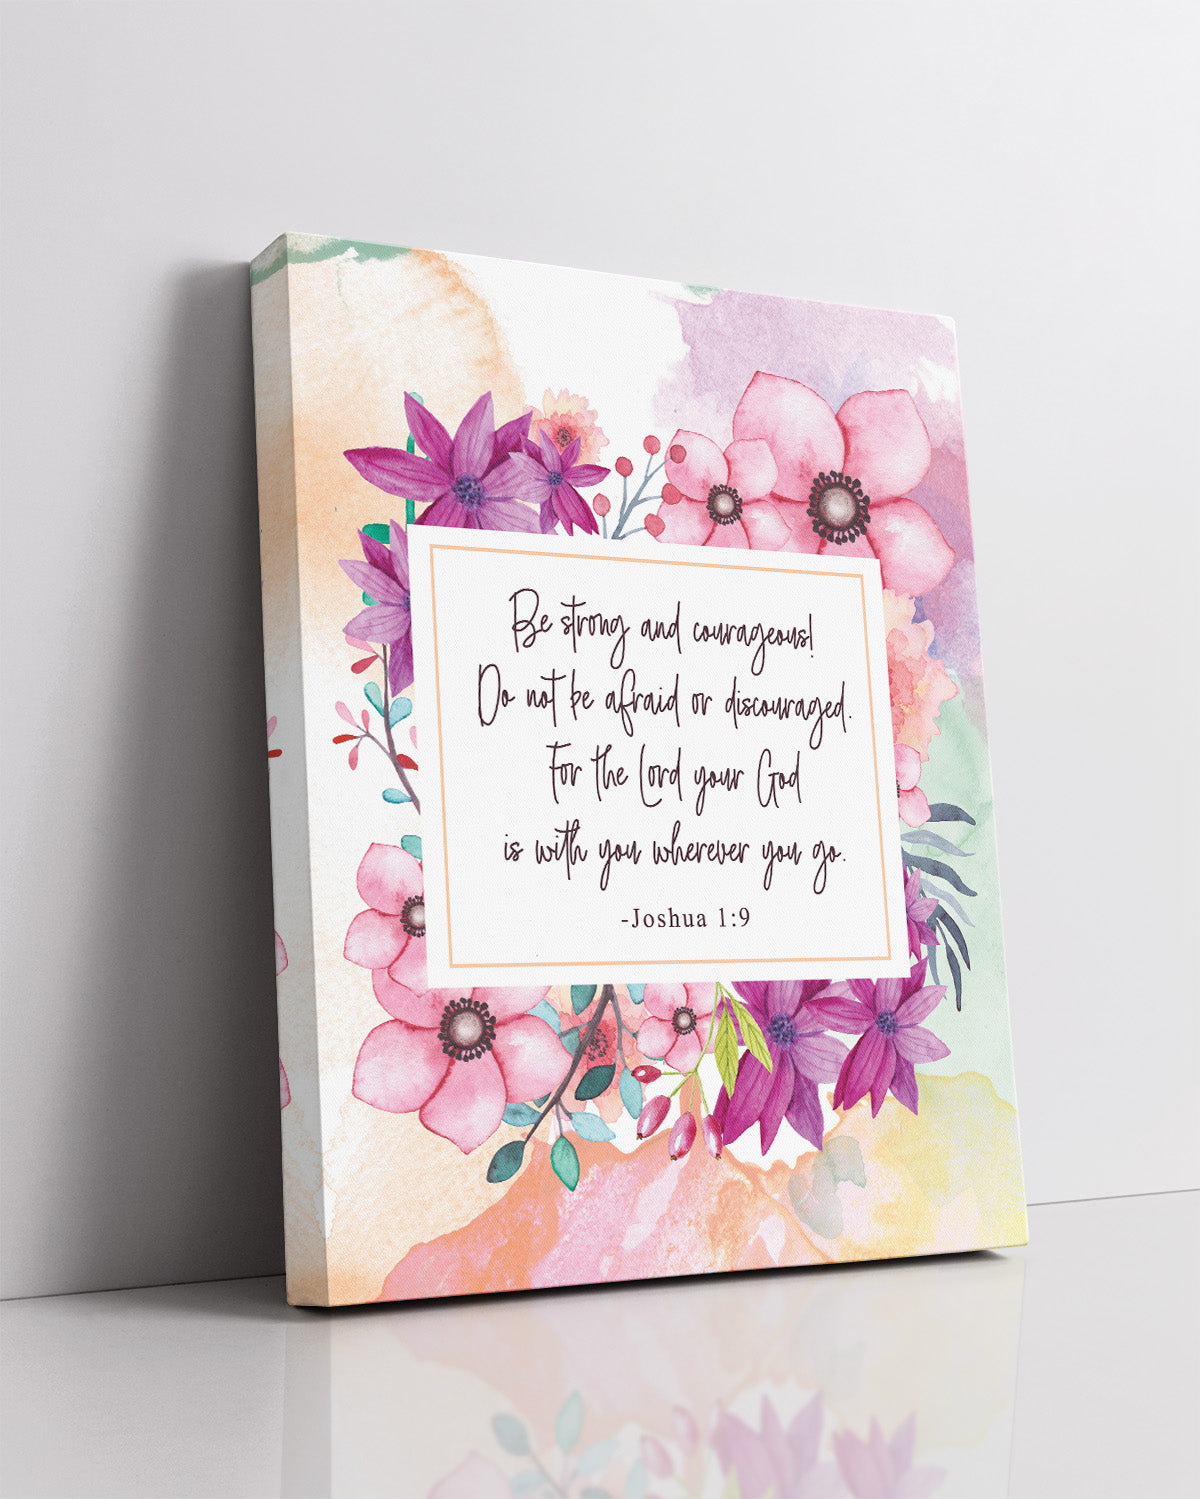 Be Strong and Courageous - Christian Wall Art Decor Print with a colorful floral background - Great gift to give your female friends and relatives - Poster & Canvas Sizes